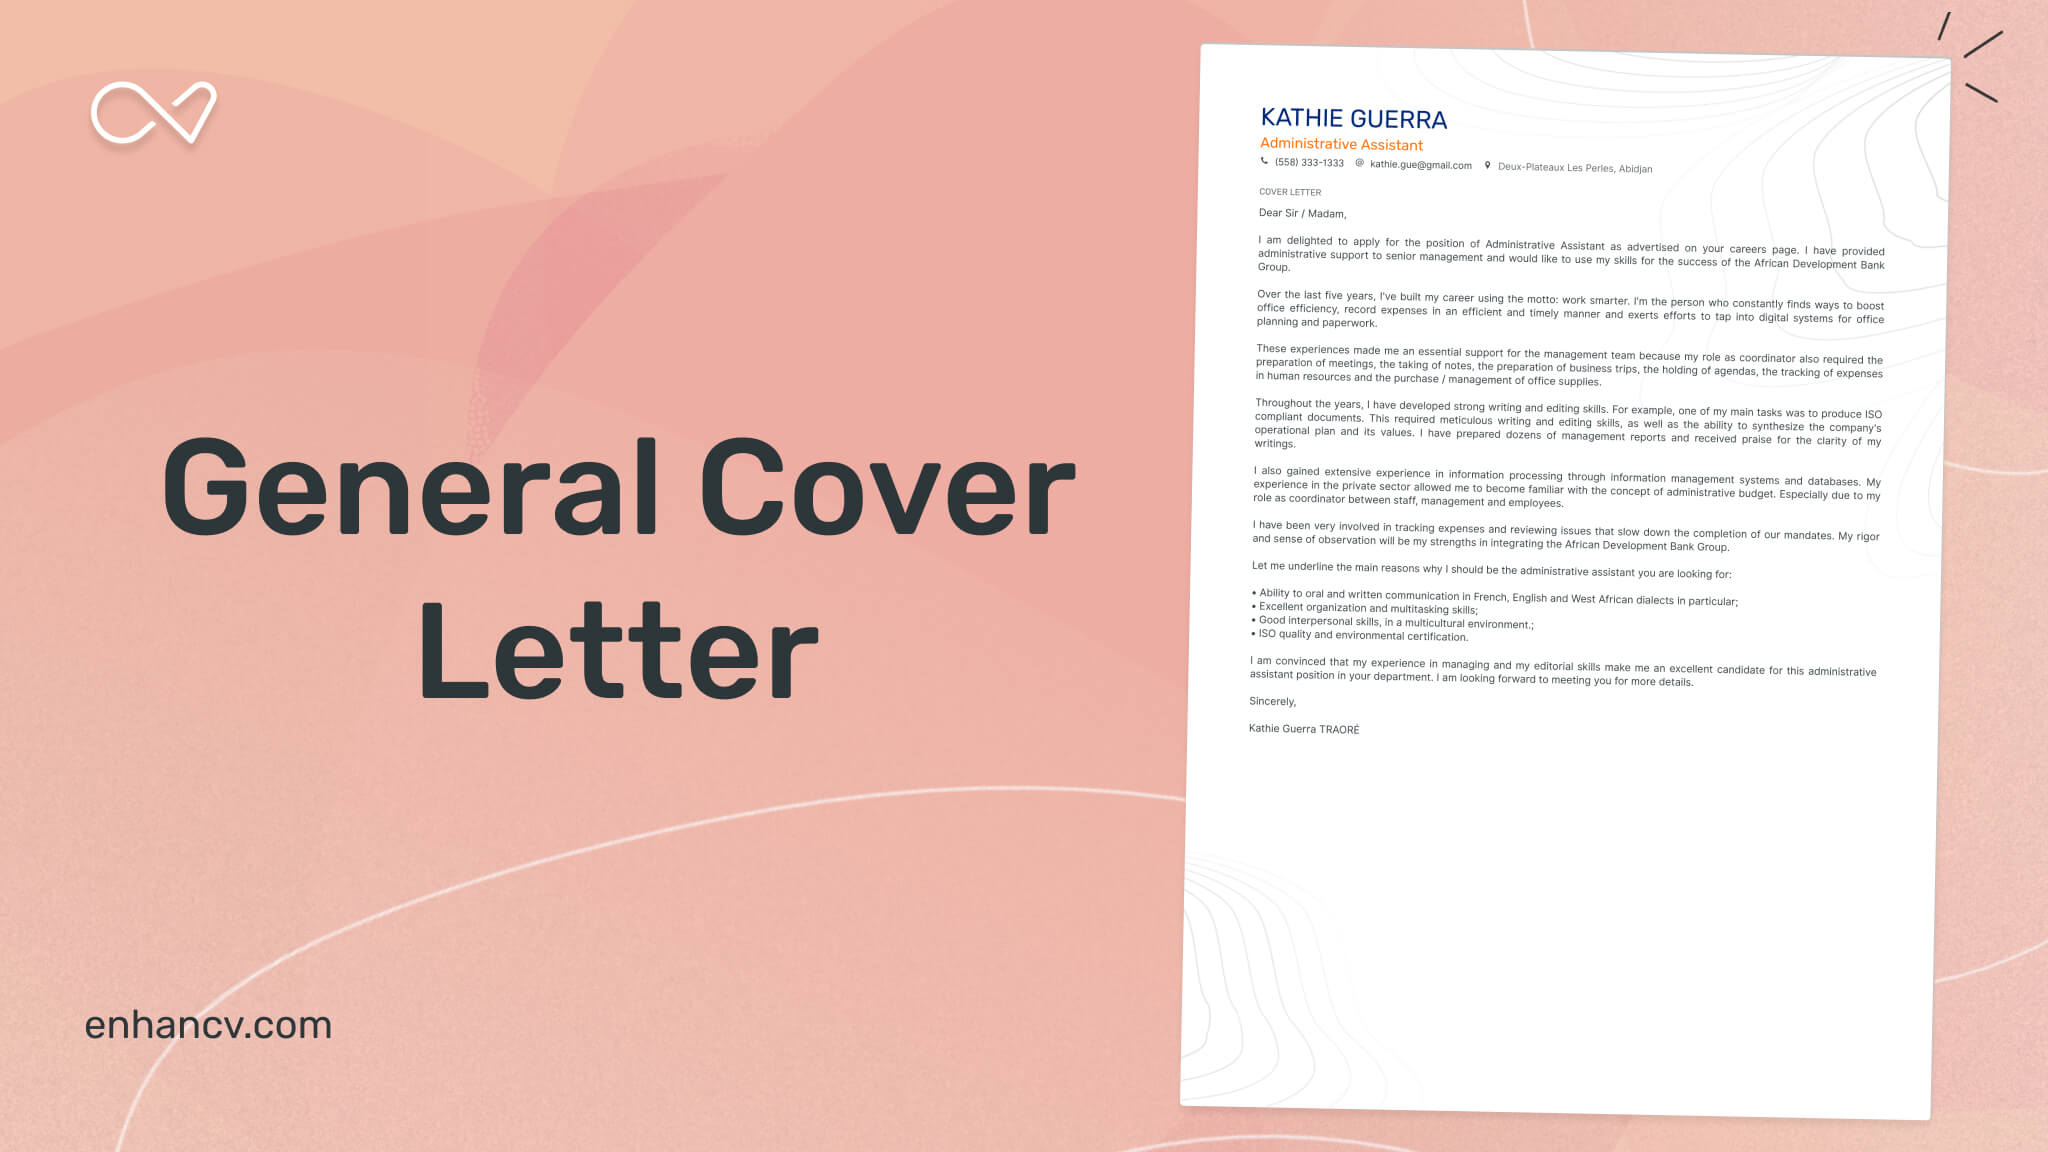 How to Create a General Cover Letter (With Examples and Tips)